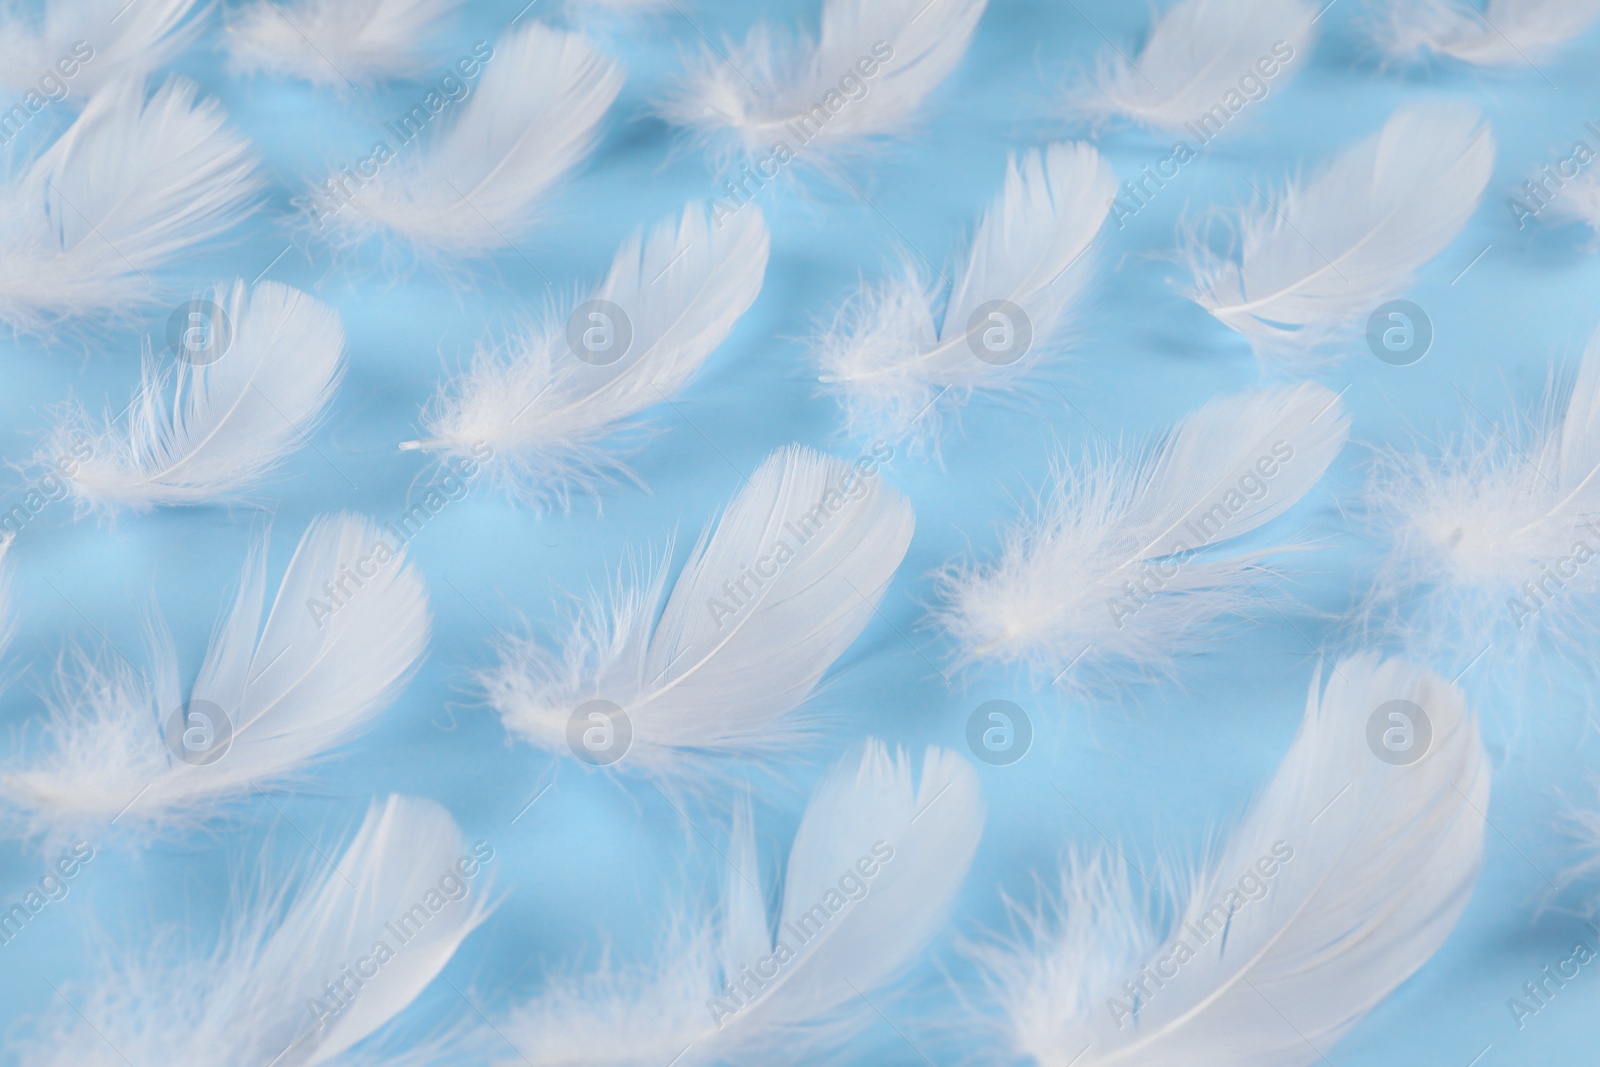 Photo of Fluffy white feathers on light blue background